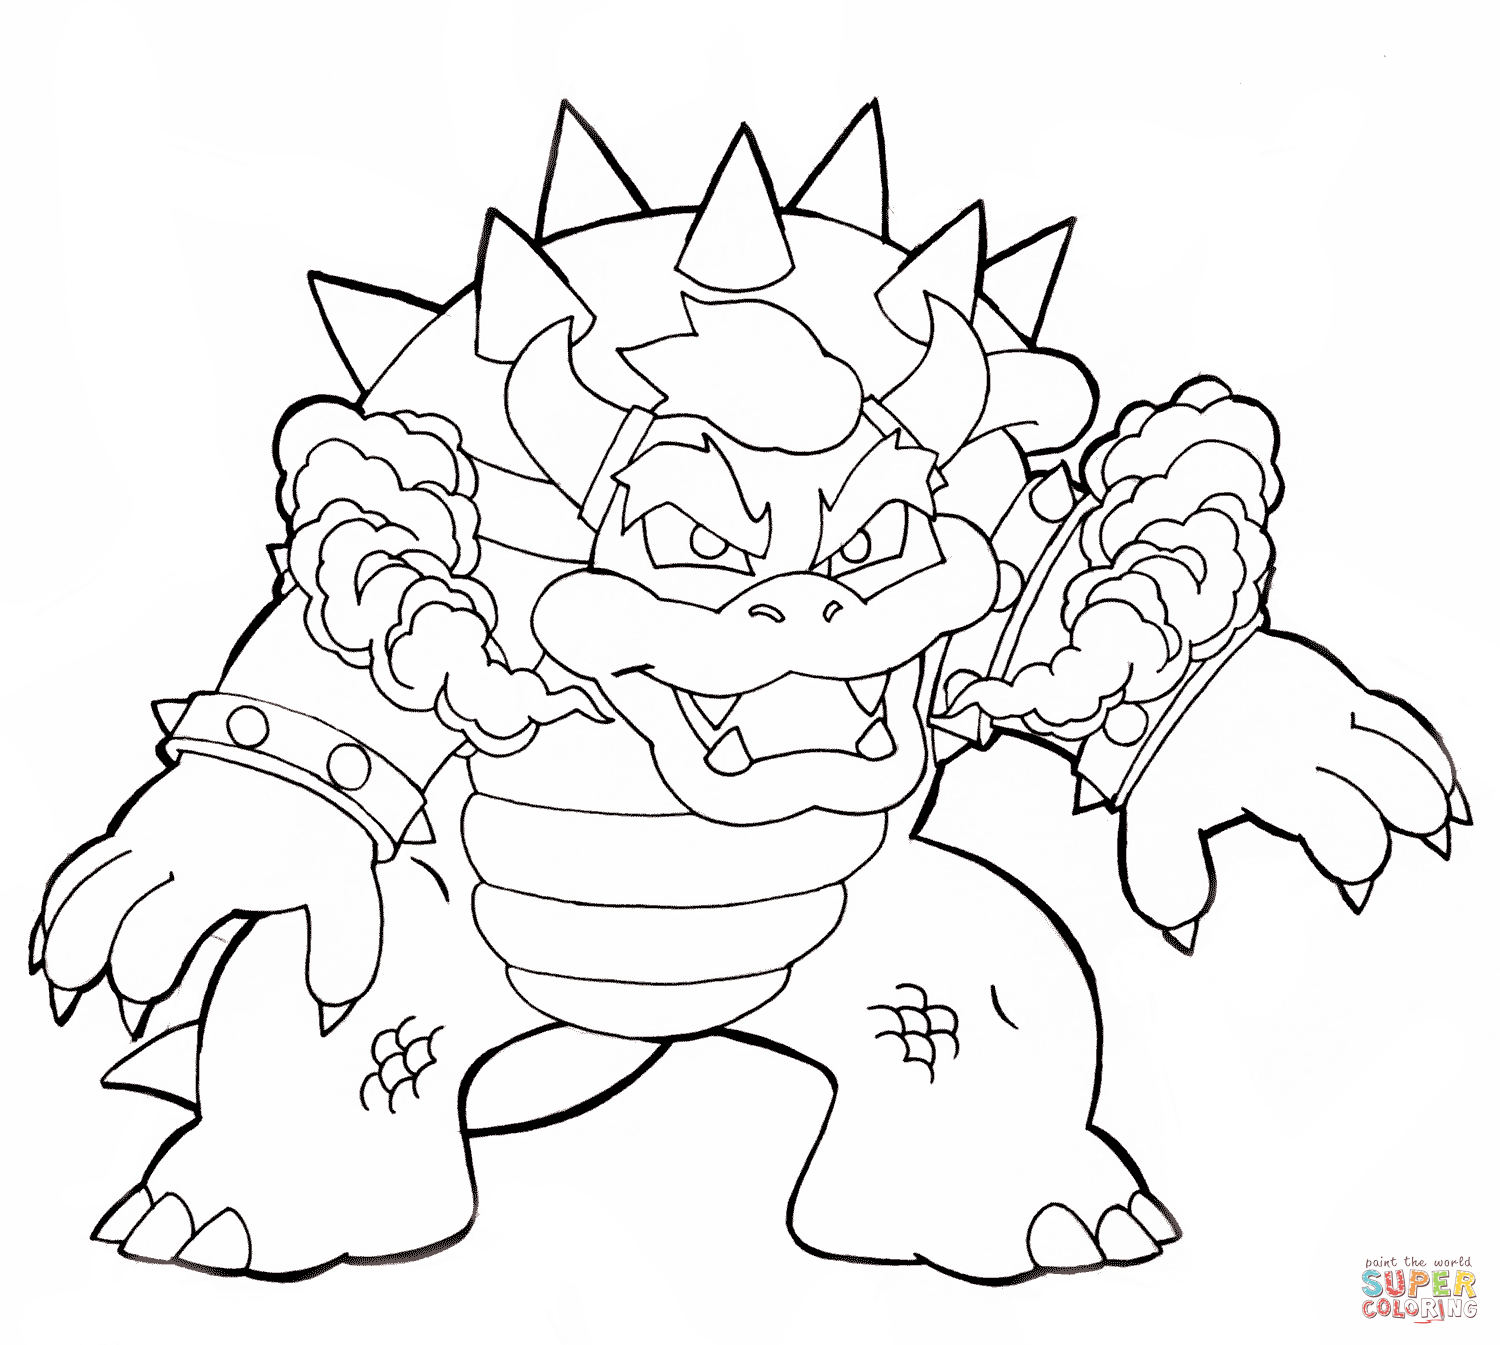 Bowser Coloring Pages Online - Coloring Home